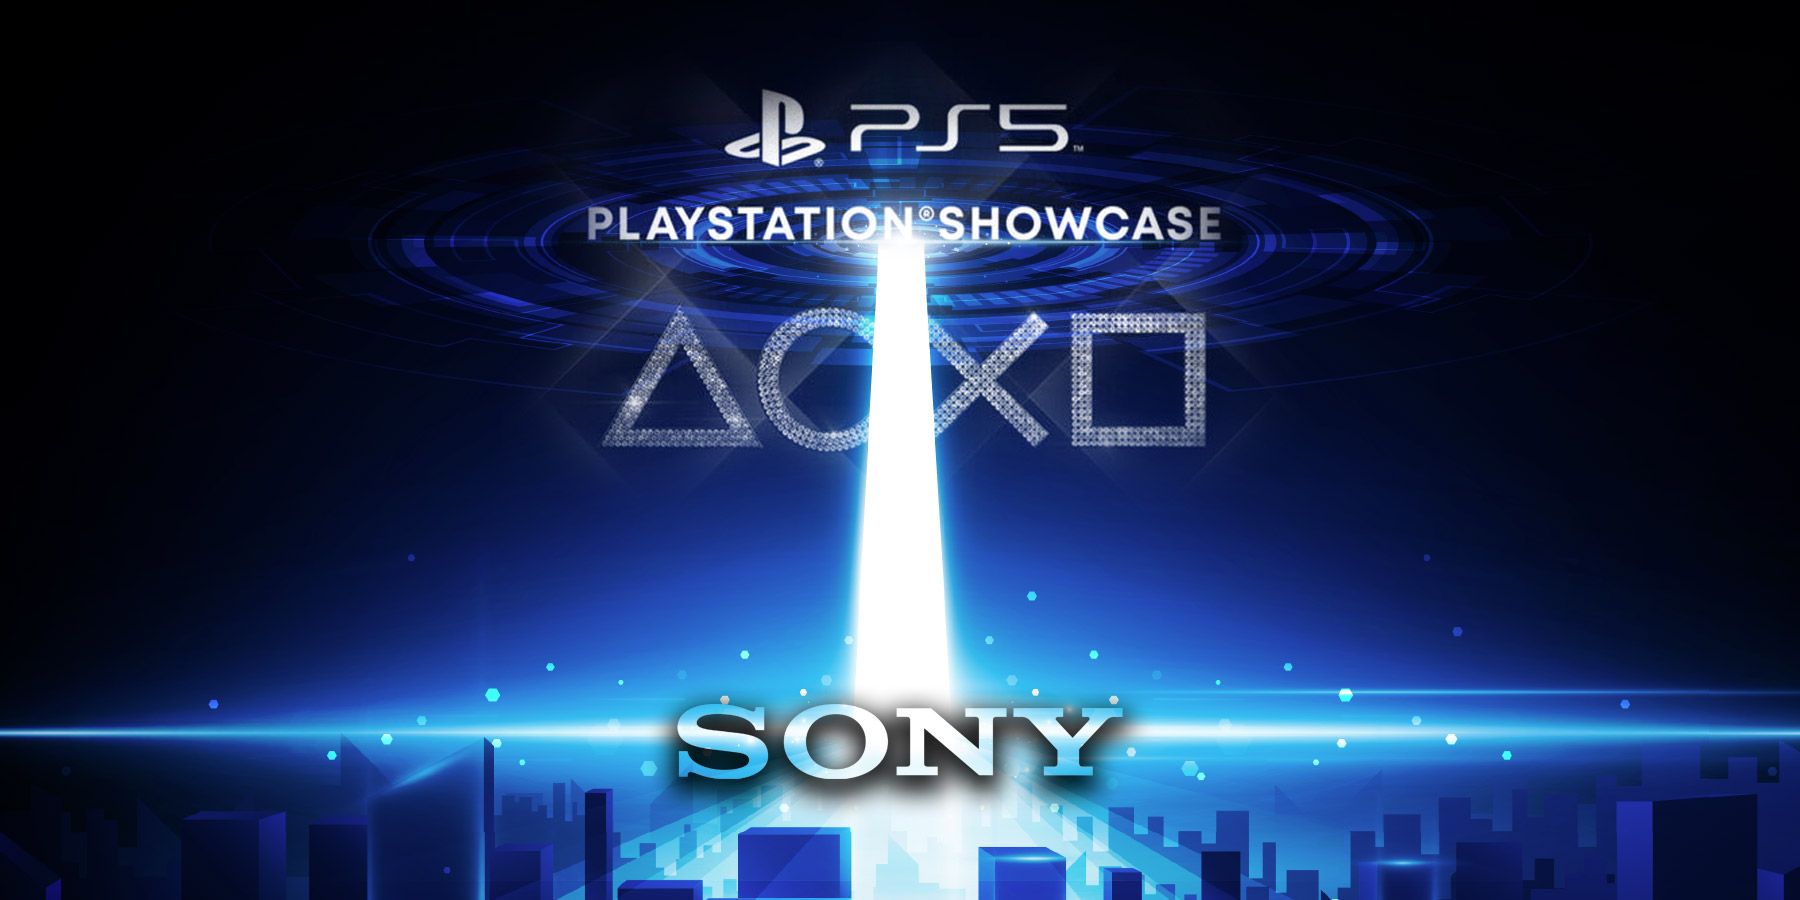 Sony Is Constructing Up To a Massive PlayStation Showcase gamingshift.in